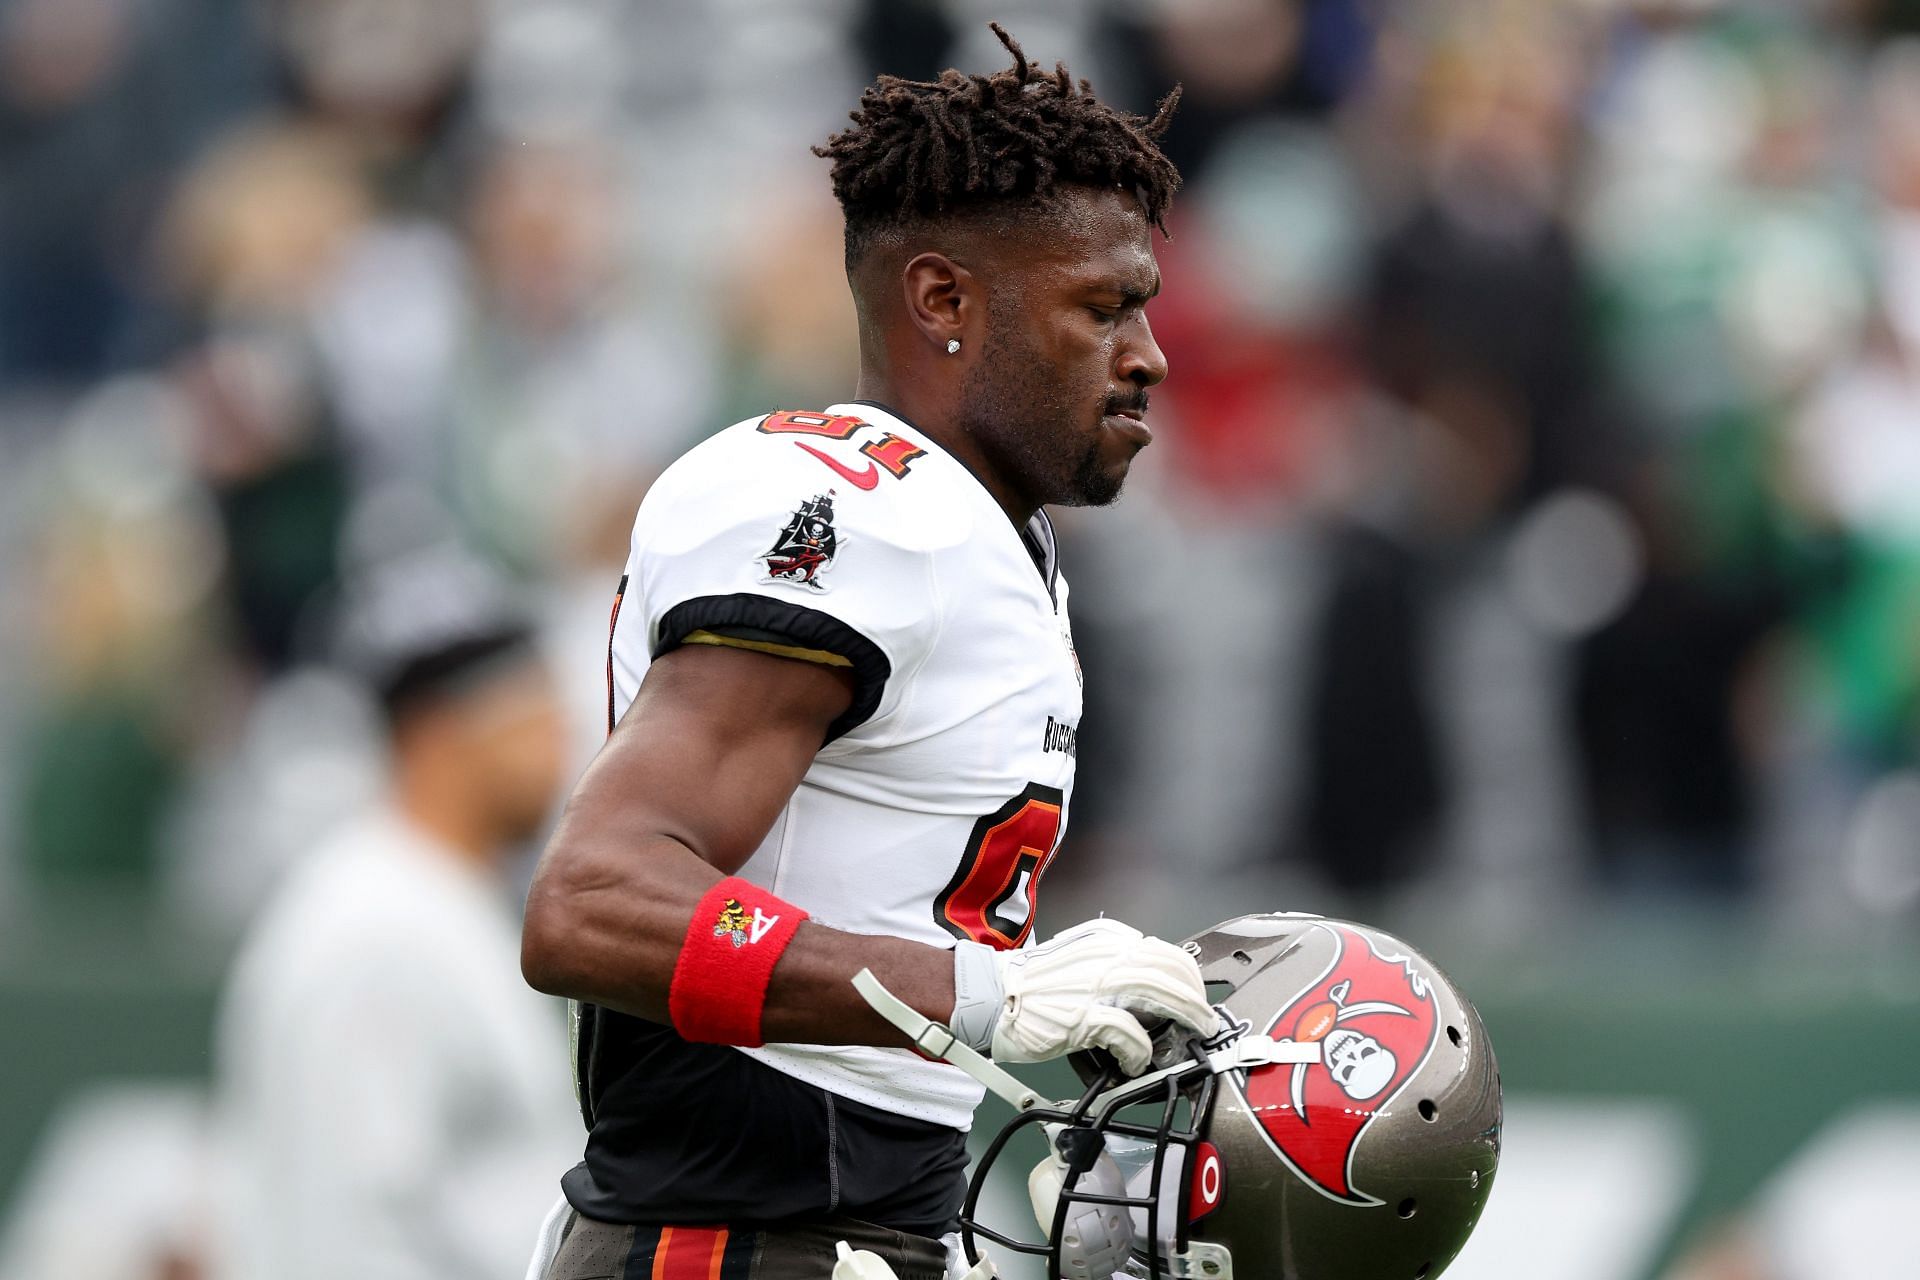 Antonio Brown playing for Tampa Bay Buccaneers v New York Jets